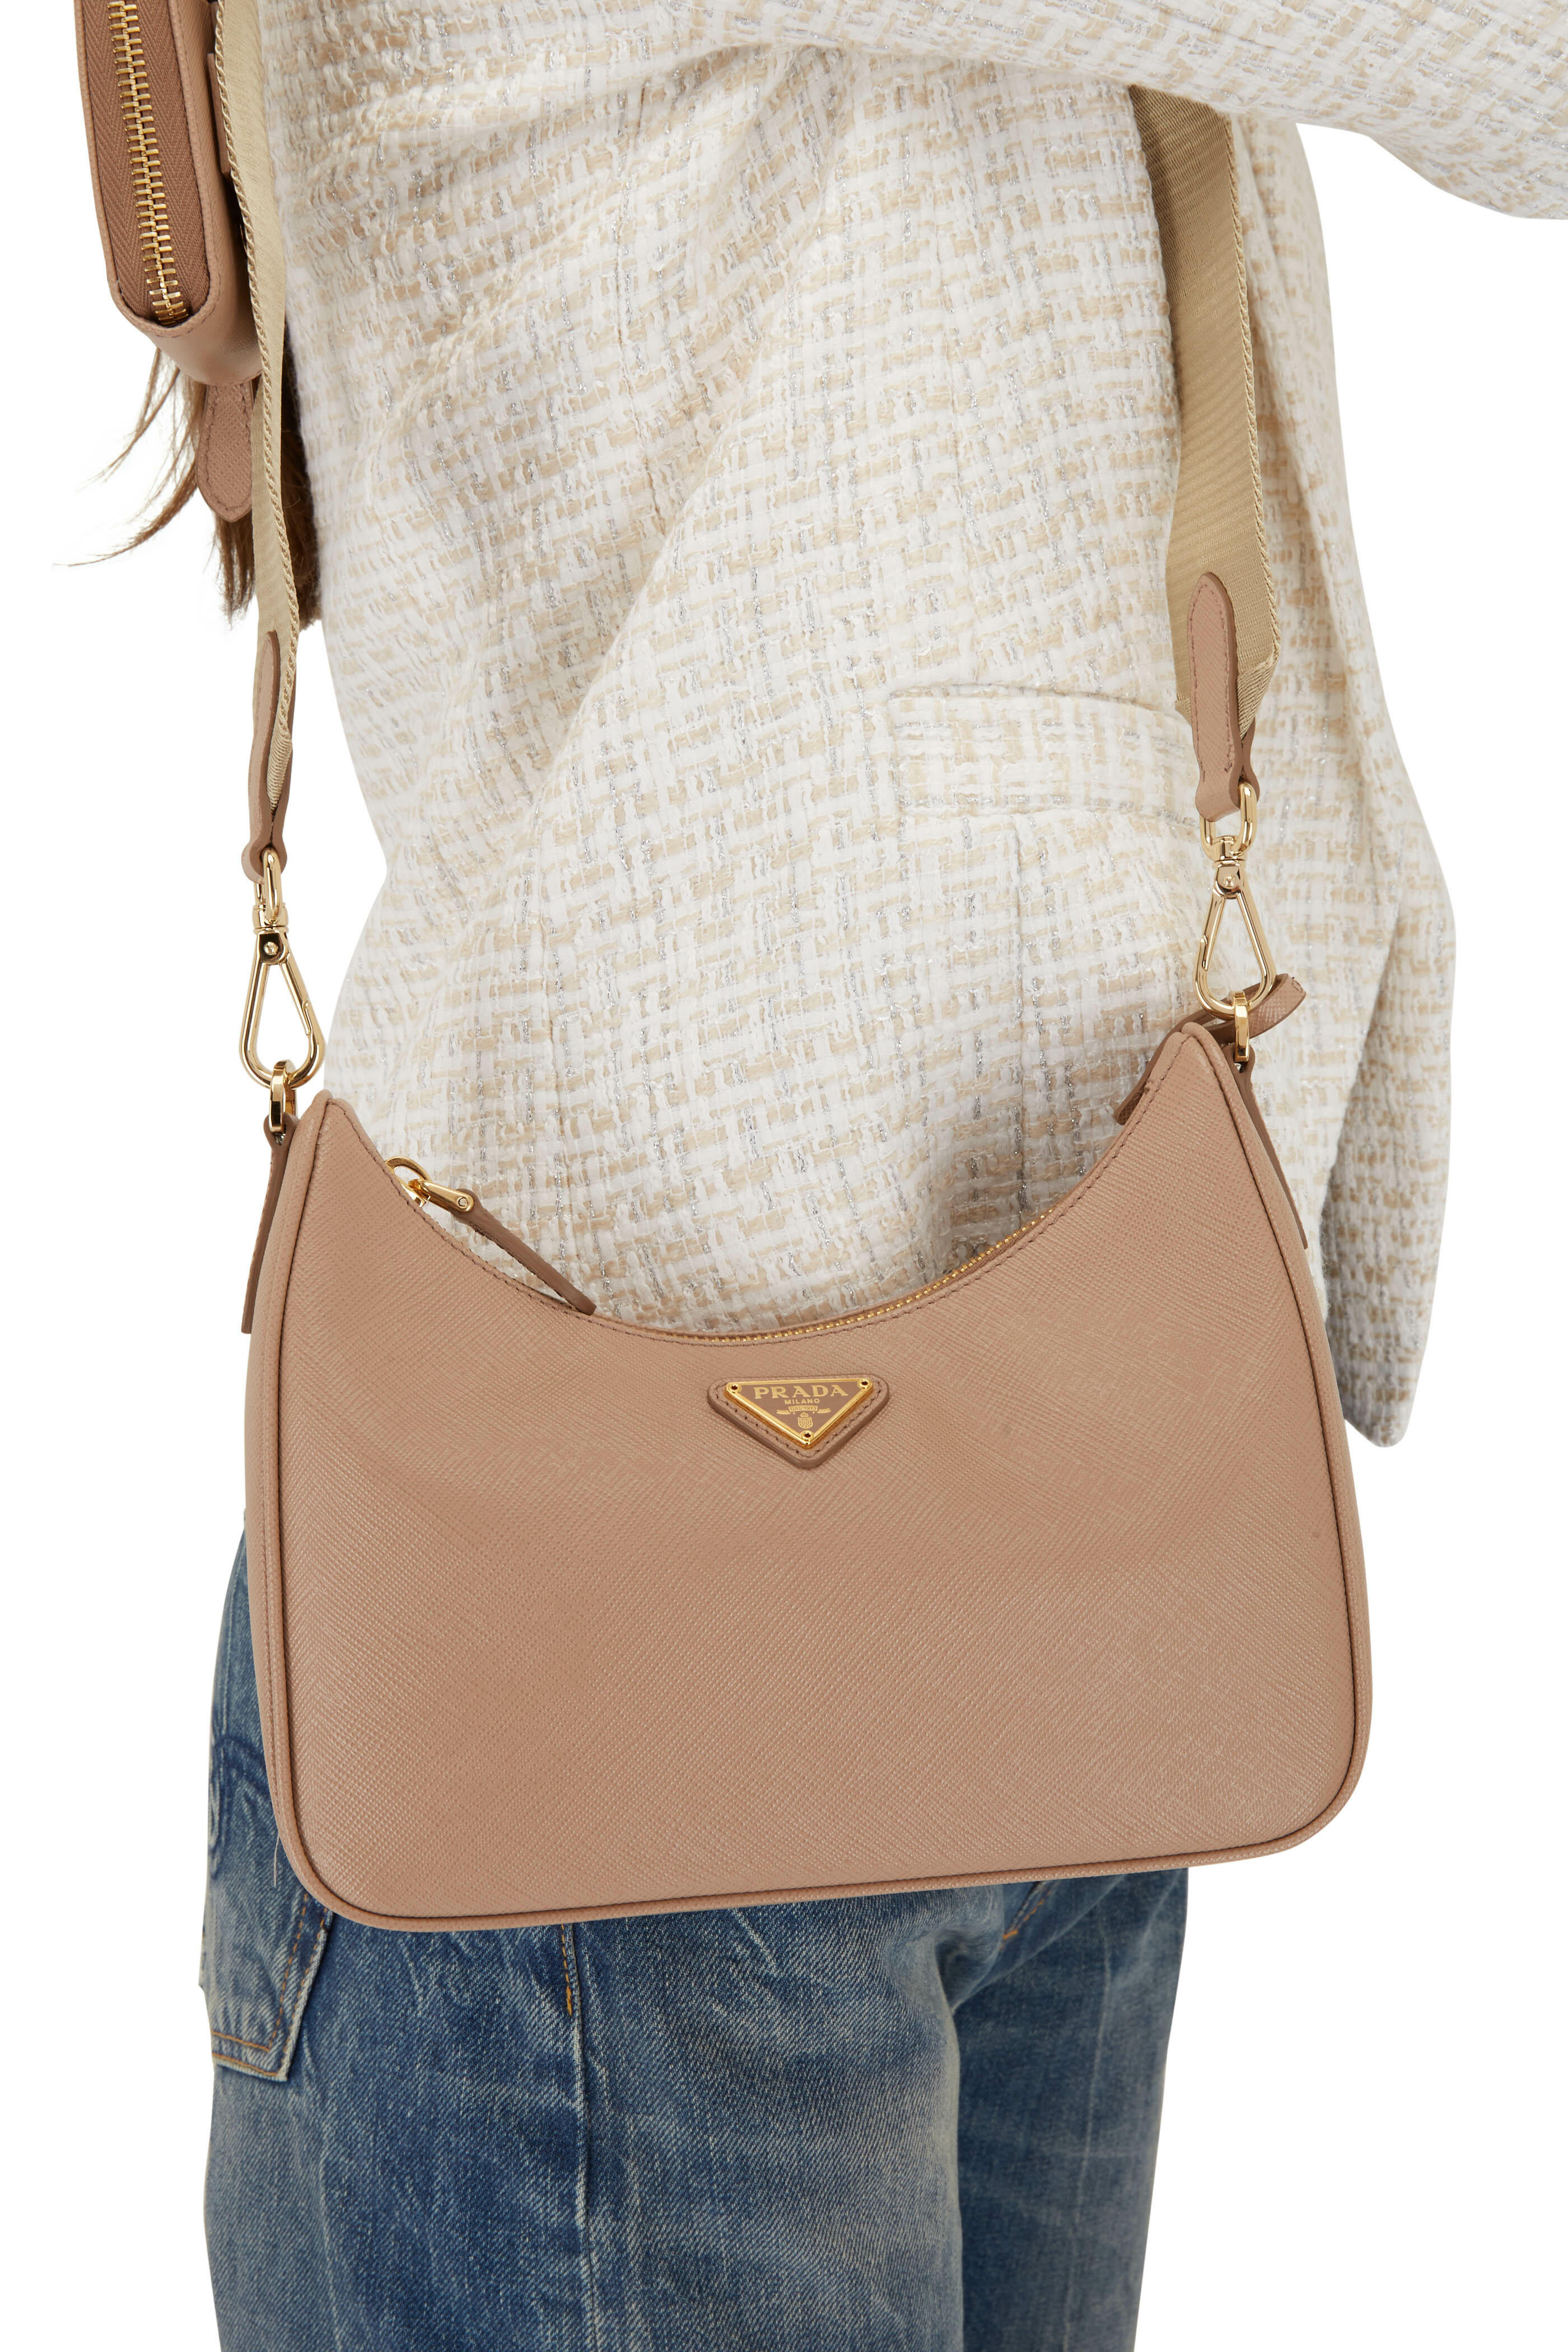 Prada - Nude Re-Edition Leather Zip Pouch Shoulder Bag